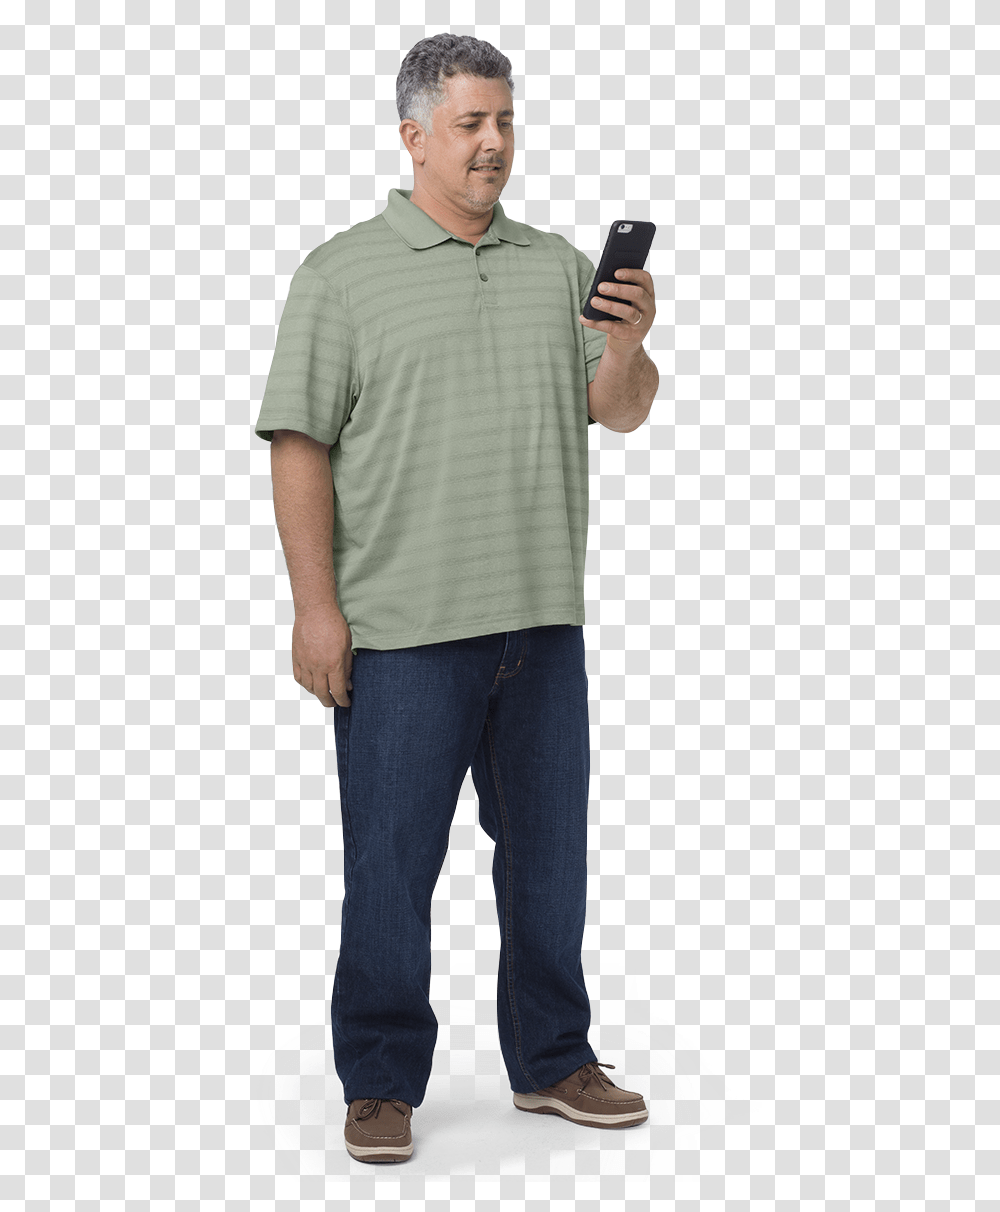 Type 2 Diabetes Patient Looking At Phone Someone With A Phone, Shoe, Footwear, Person Transparent Png